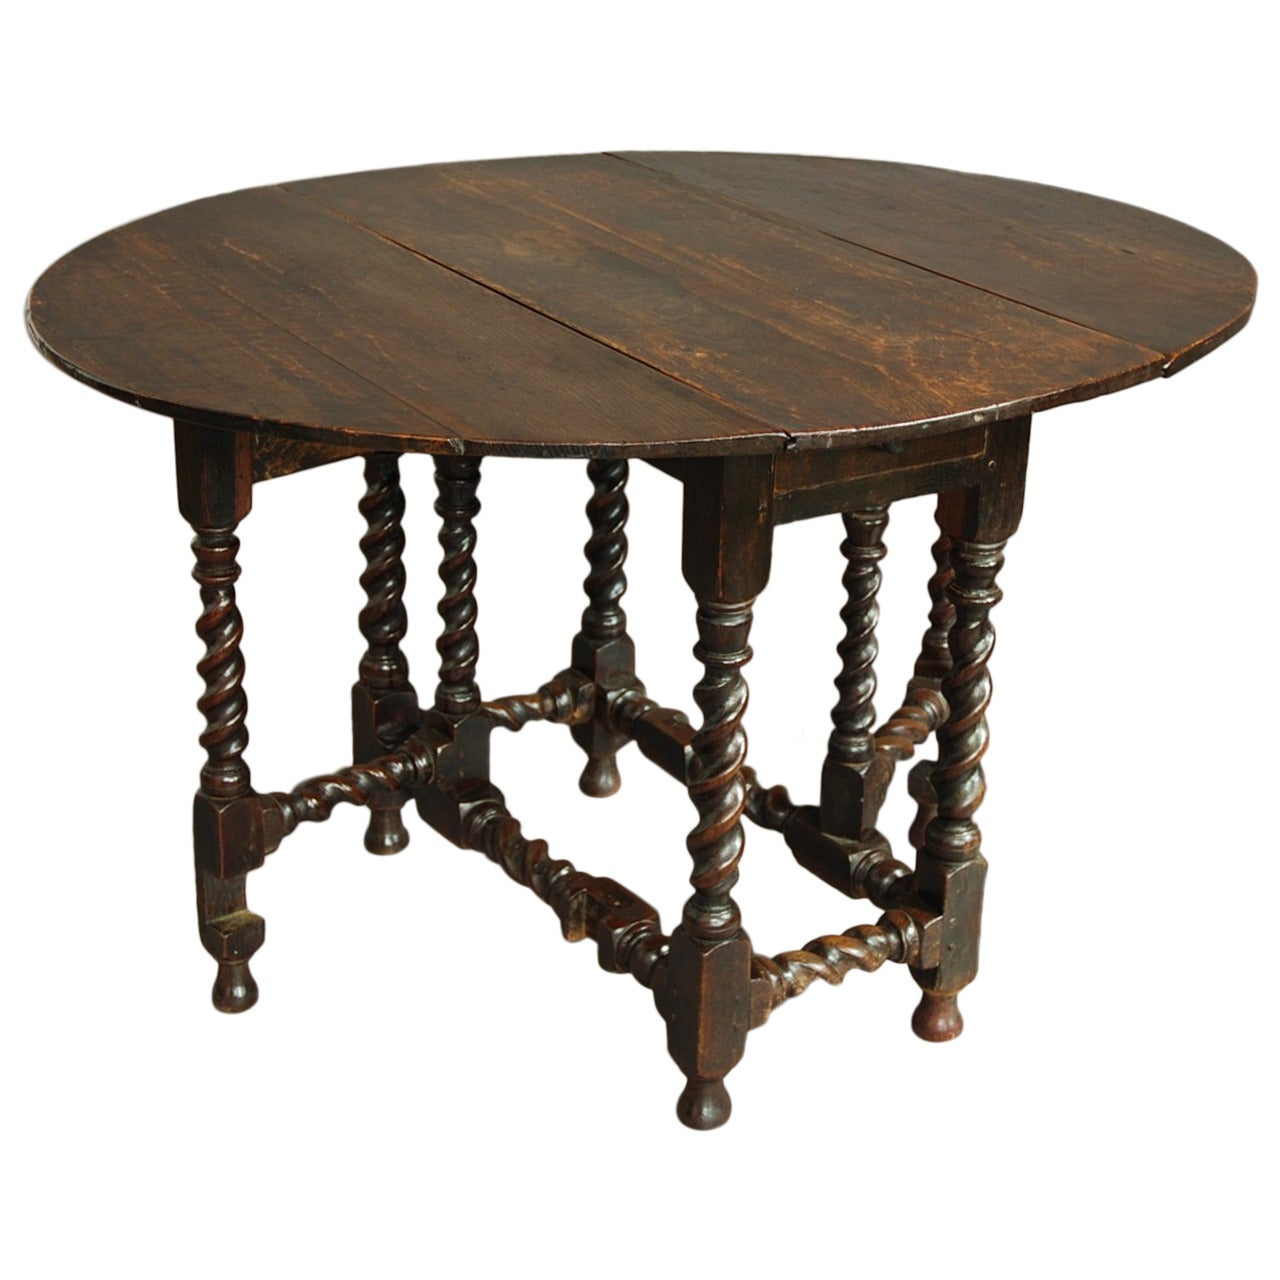 Late 17th Century Oak Gateleg Table of Small Proportions